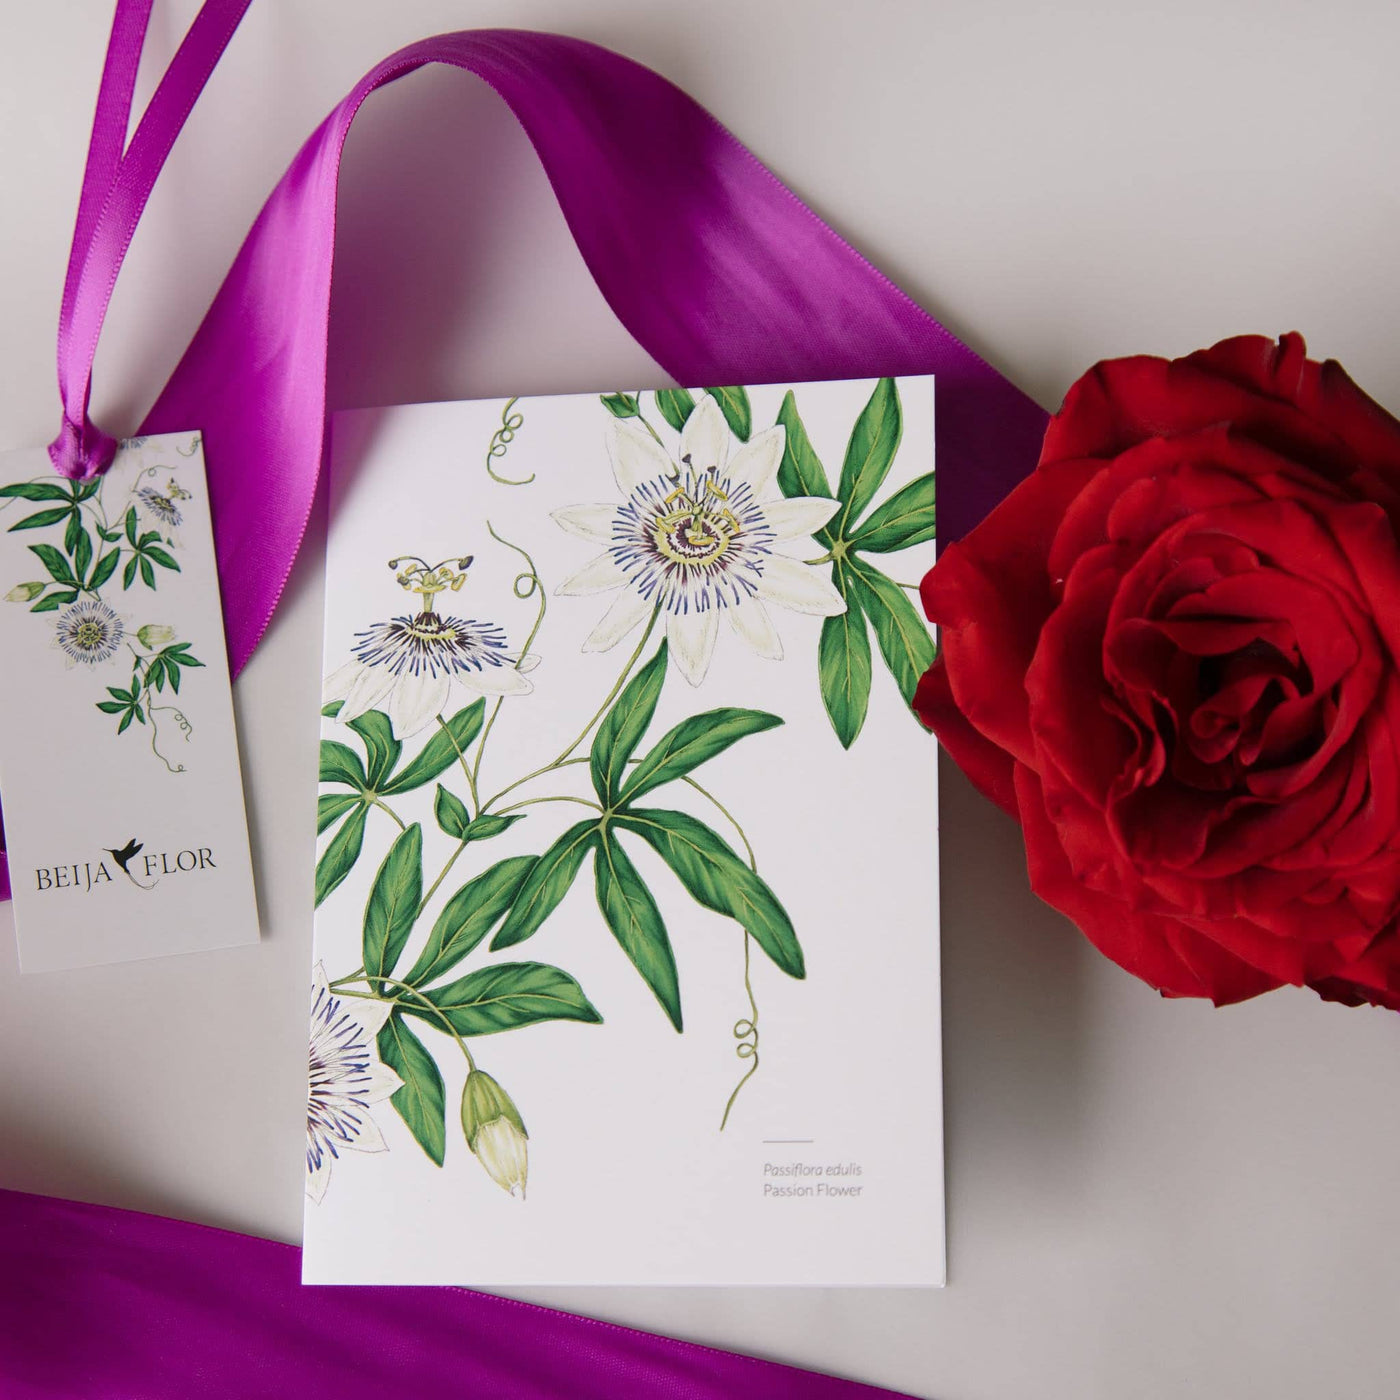 passionflower illustrated gift card